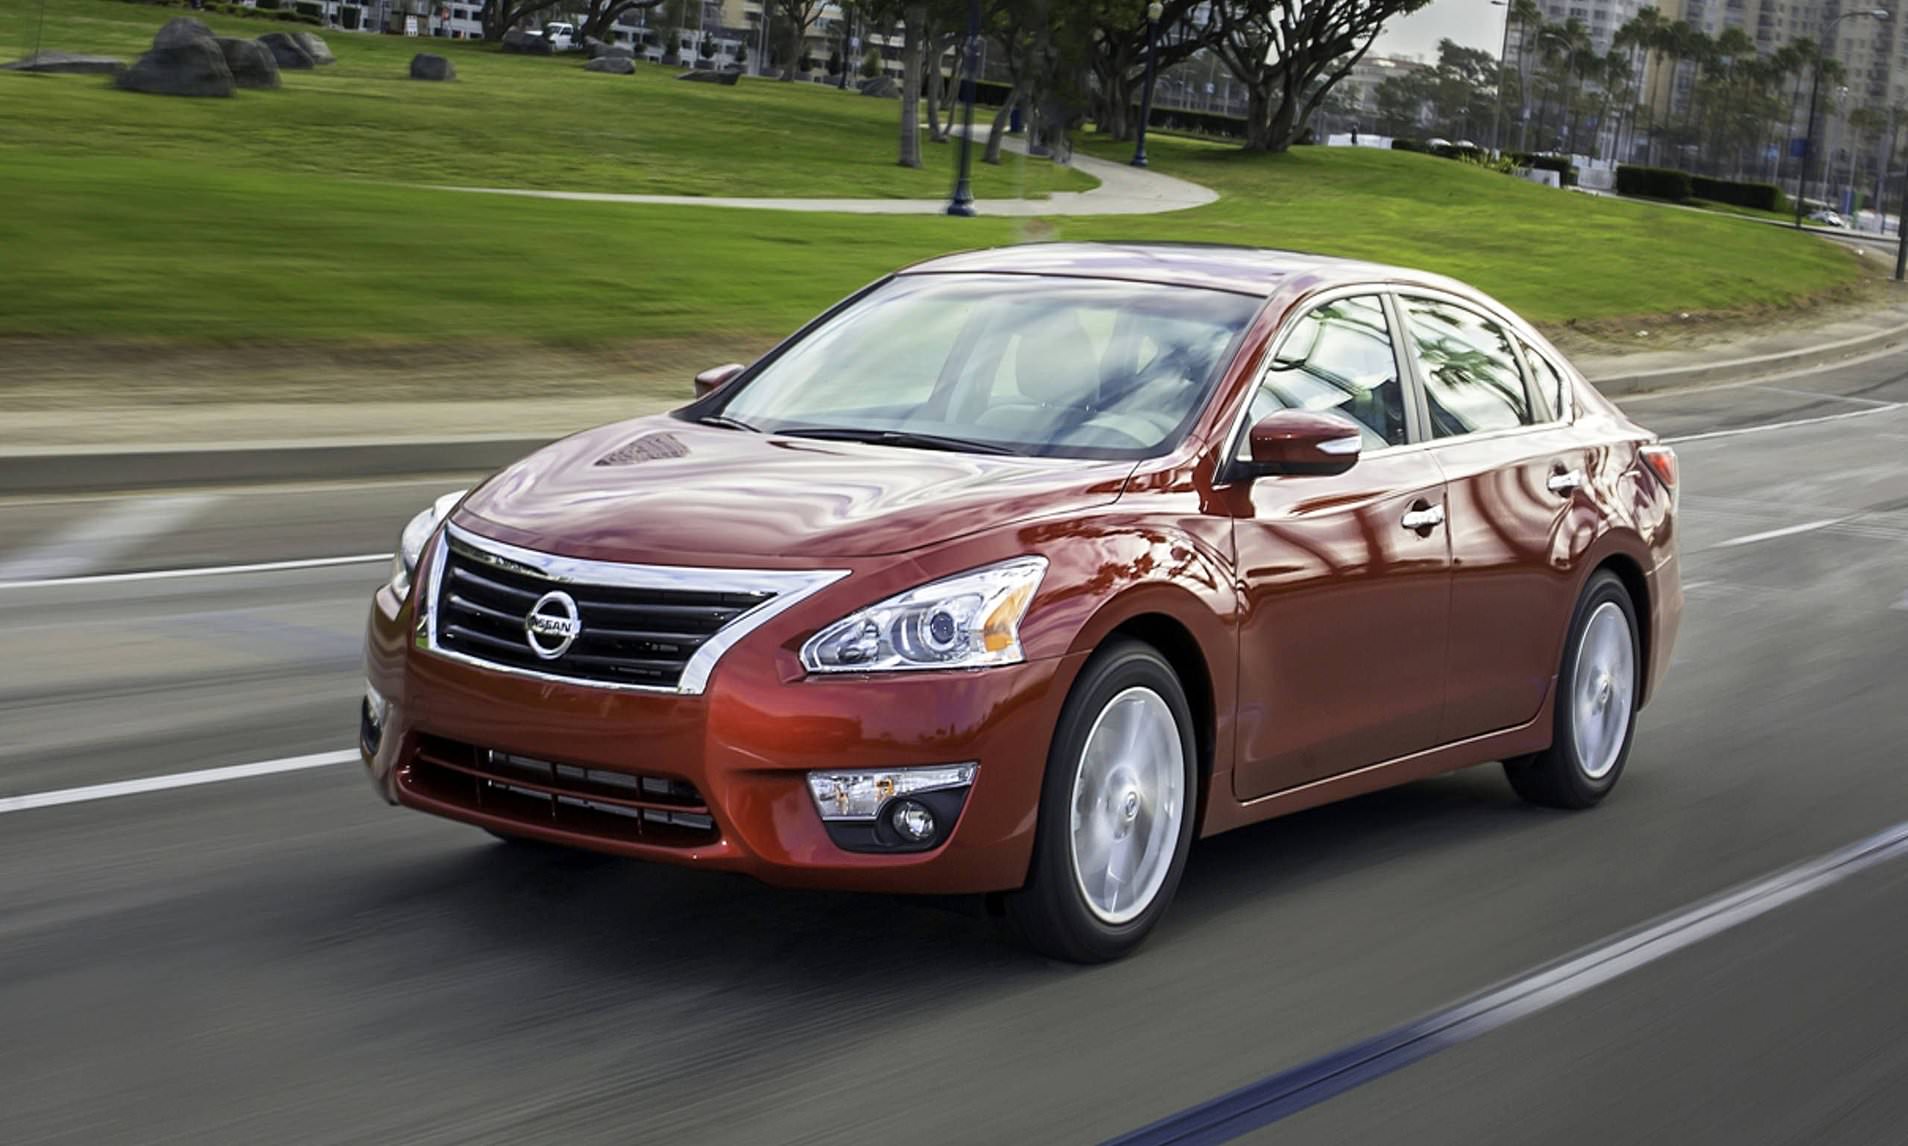 Nissan issues a fourth recall for a seemingly unfixable hood latch issue